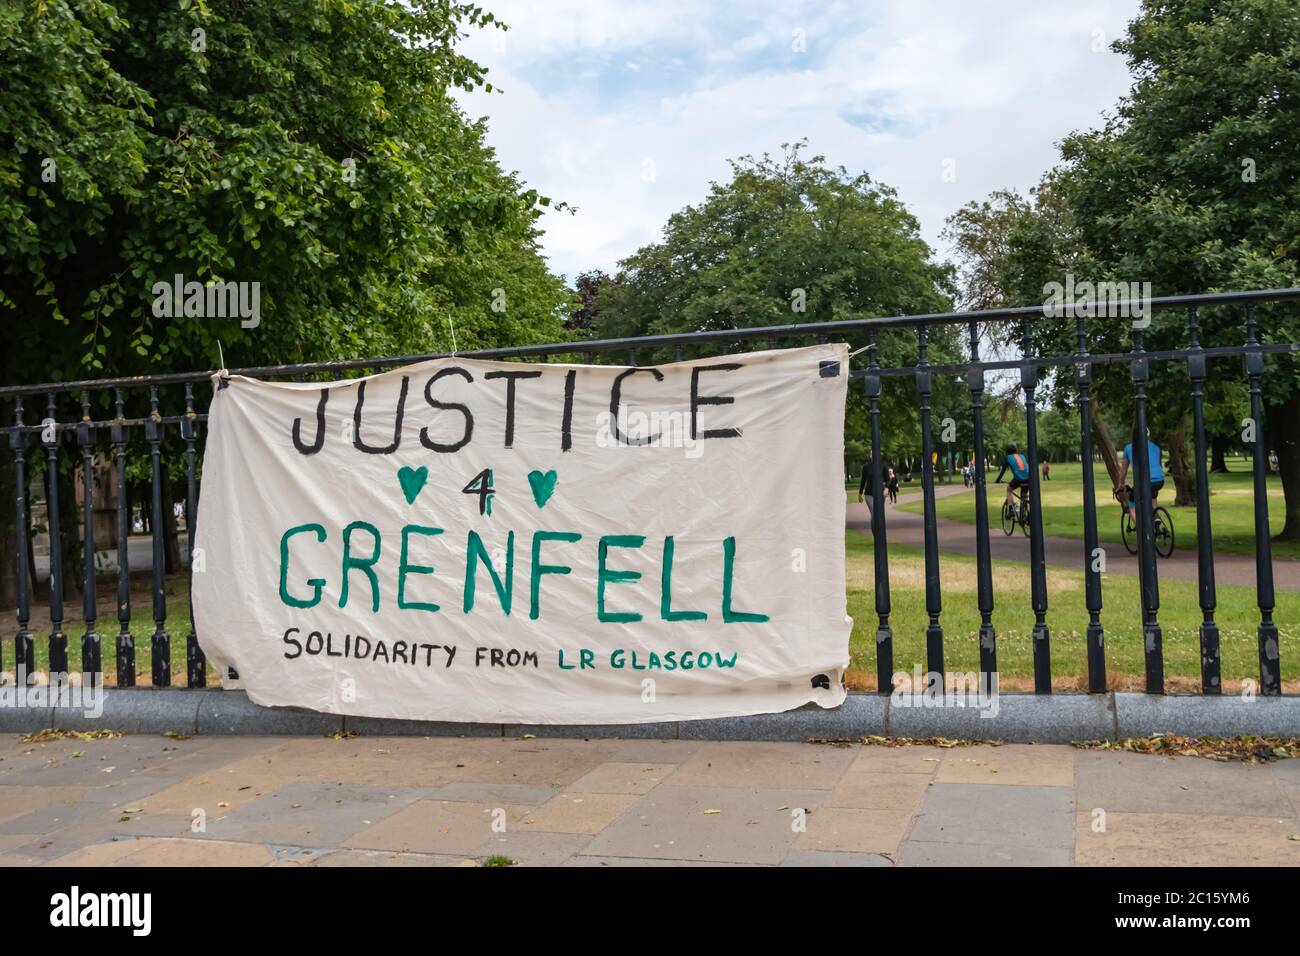 Glasgow, Scotland, UK. 14th June, 2020. A banner fixed to the railings of Glasgow Green saying Justice 4 Grenfell. The  Grenfell Tower fire took place three years ago on 14th June  2017 when 72 people died after the cladding of a tower block in London caught fire. Credit: Skully/Alamy Live News Stock Photo